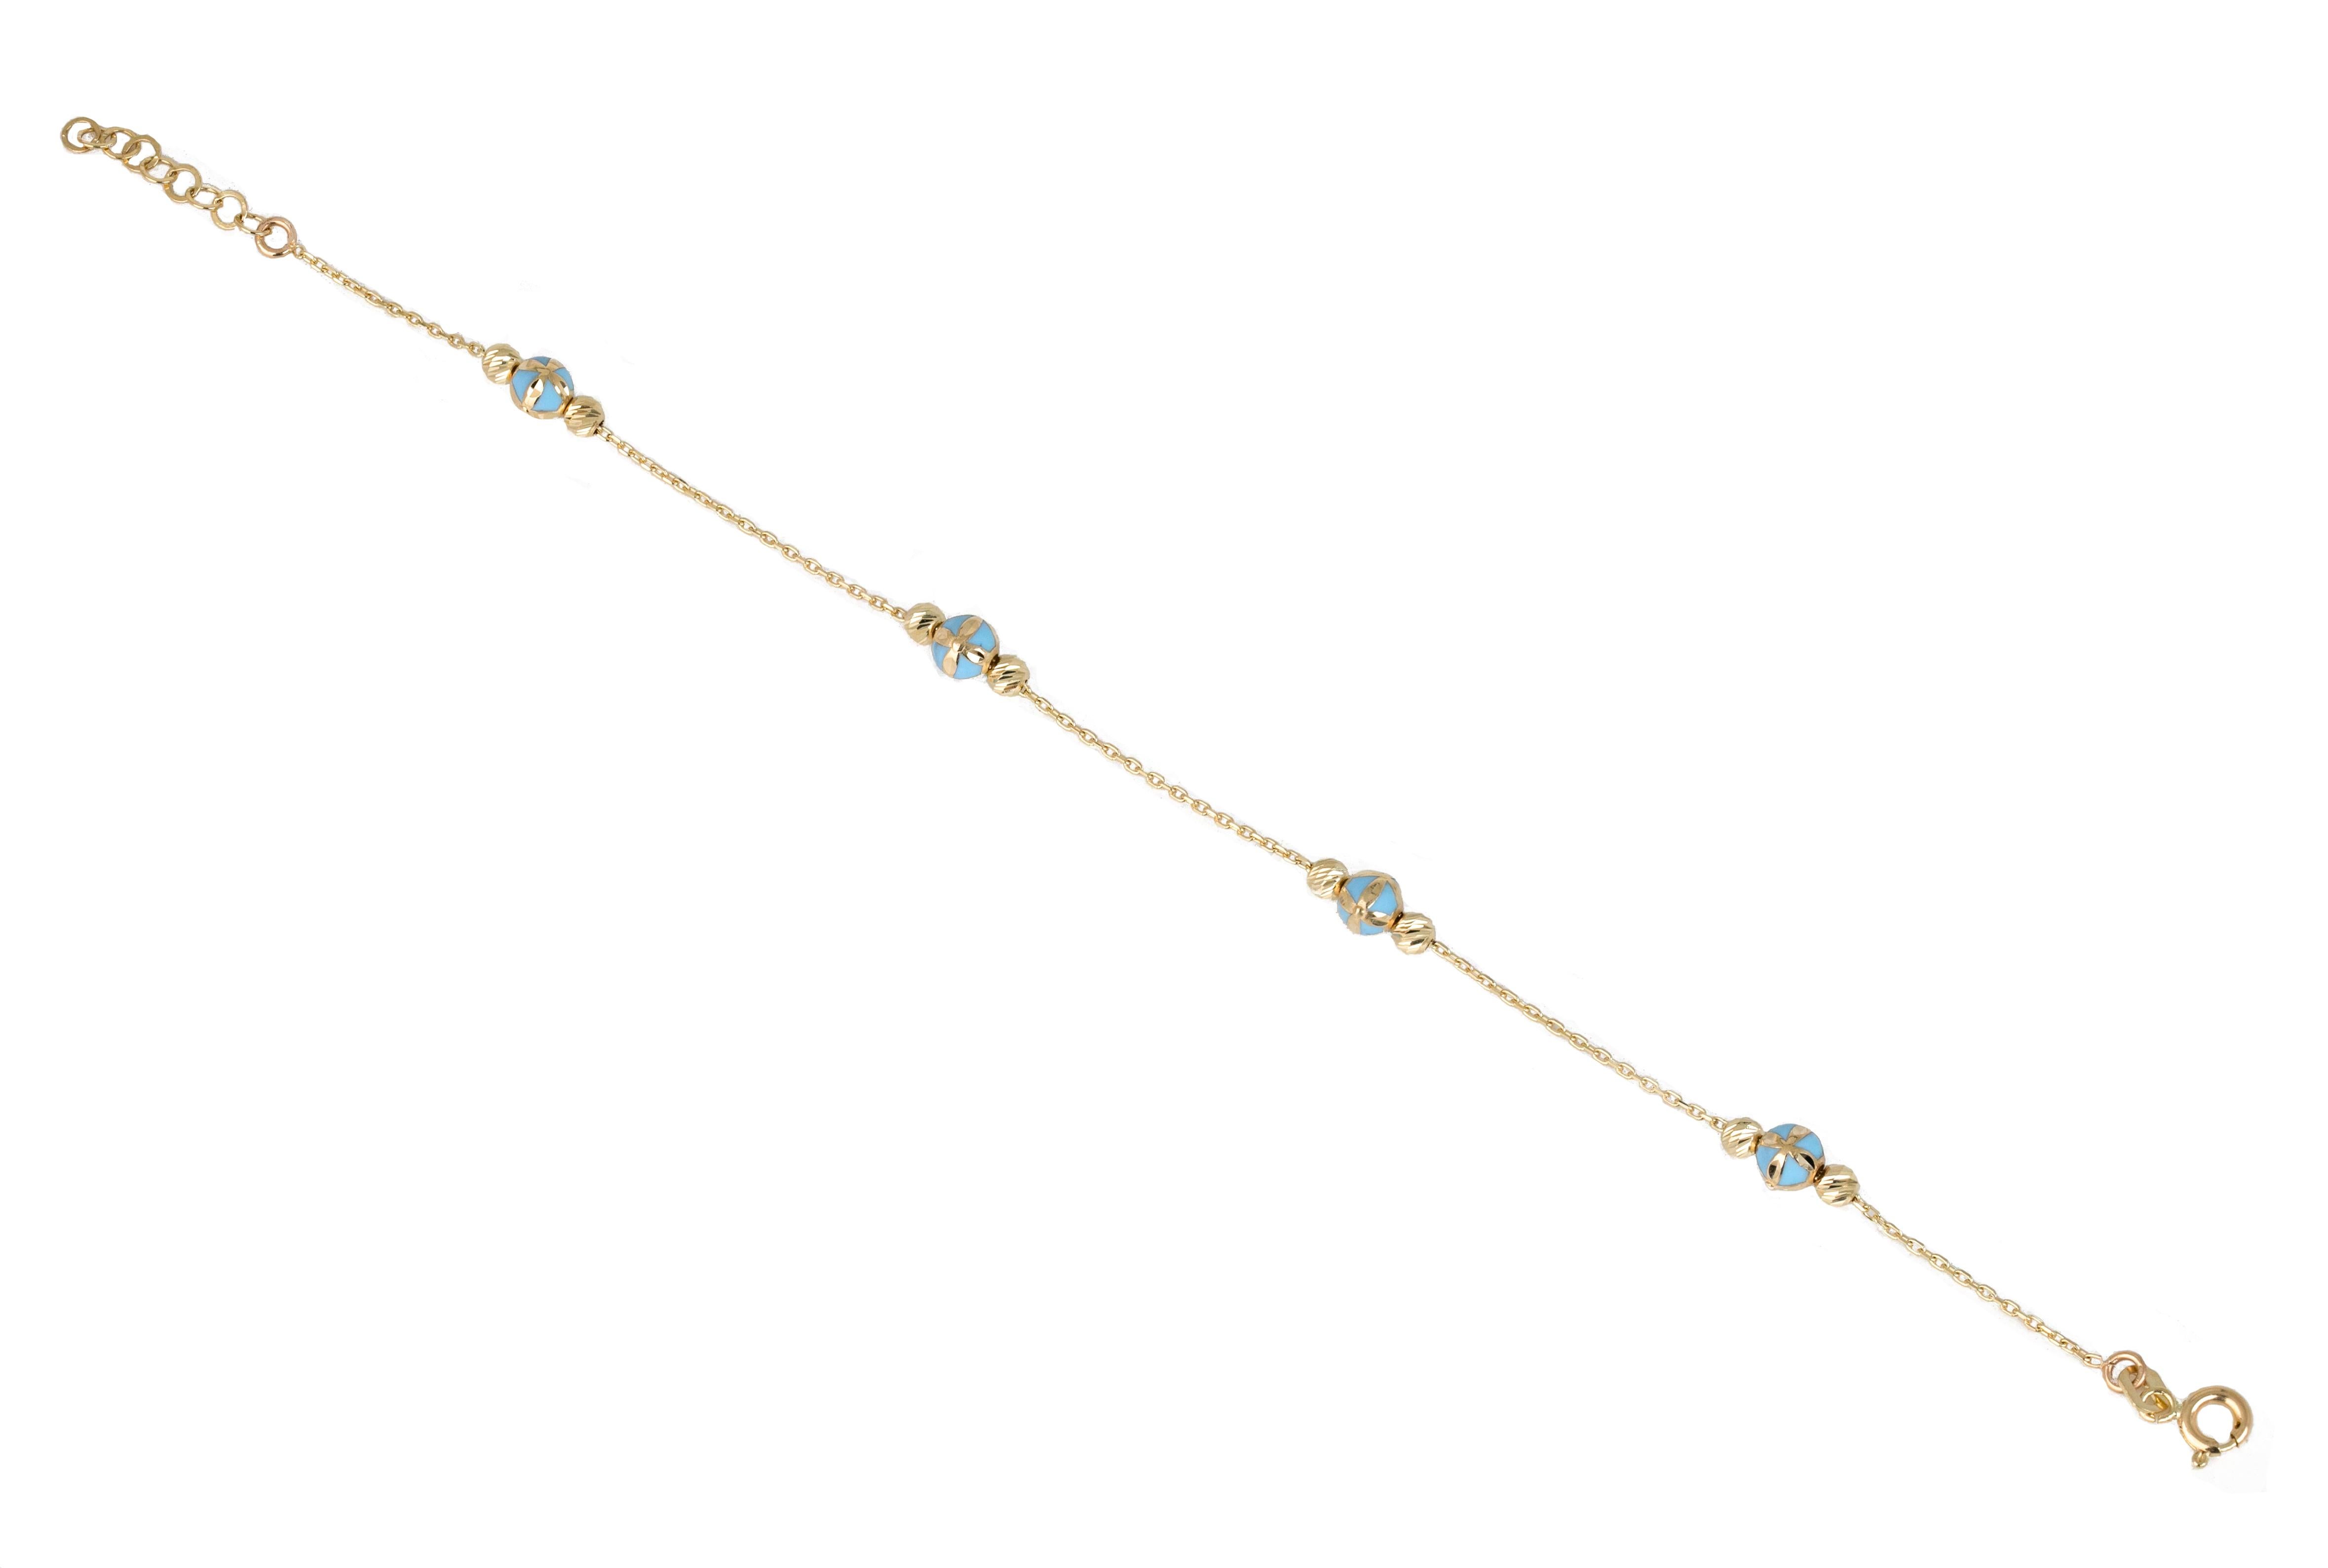 14K Gold Bracelet Blue Enameled and Dorica Collected Model Bracelet

Solid gold.
With hallmark.

Total Weight: 2,08 gr.
Size: 19.00 cm

*It is produced by placing two Dorica Balls on a forse chain and a large ball with Blue Enamel and a pattern in